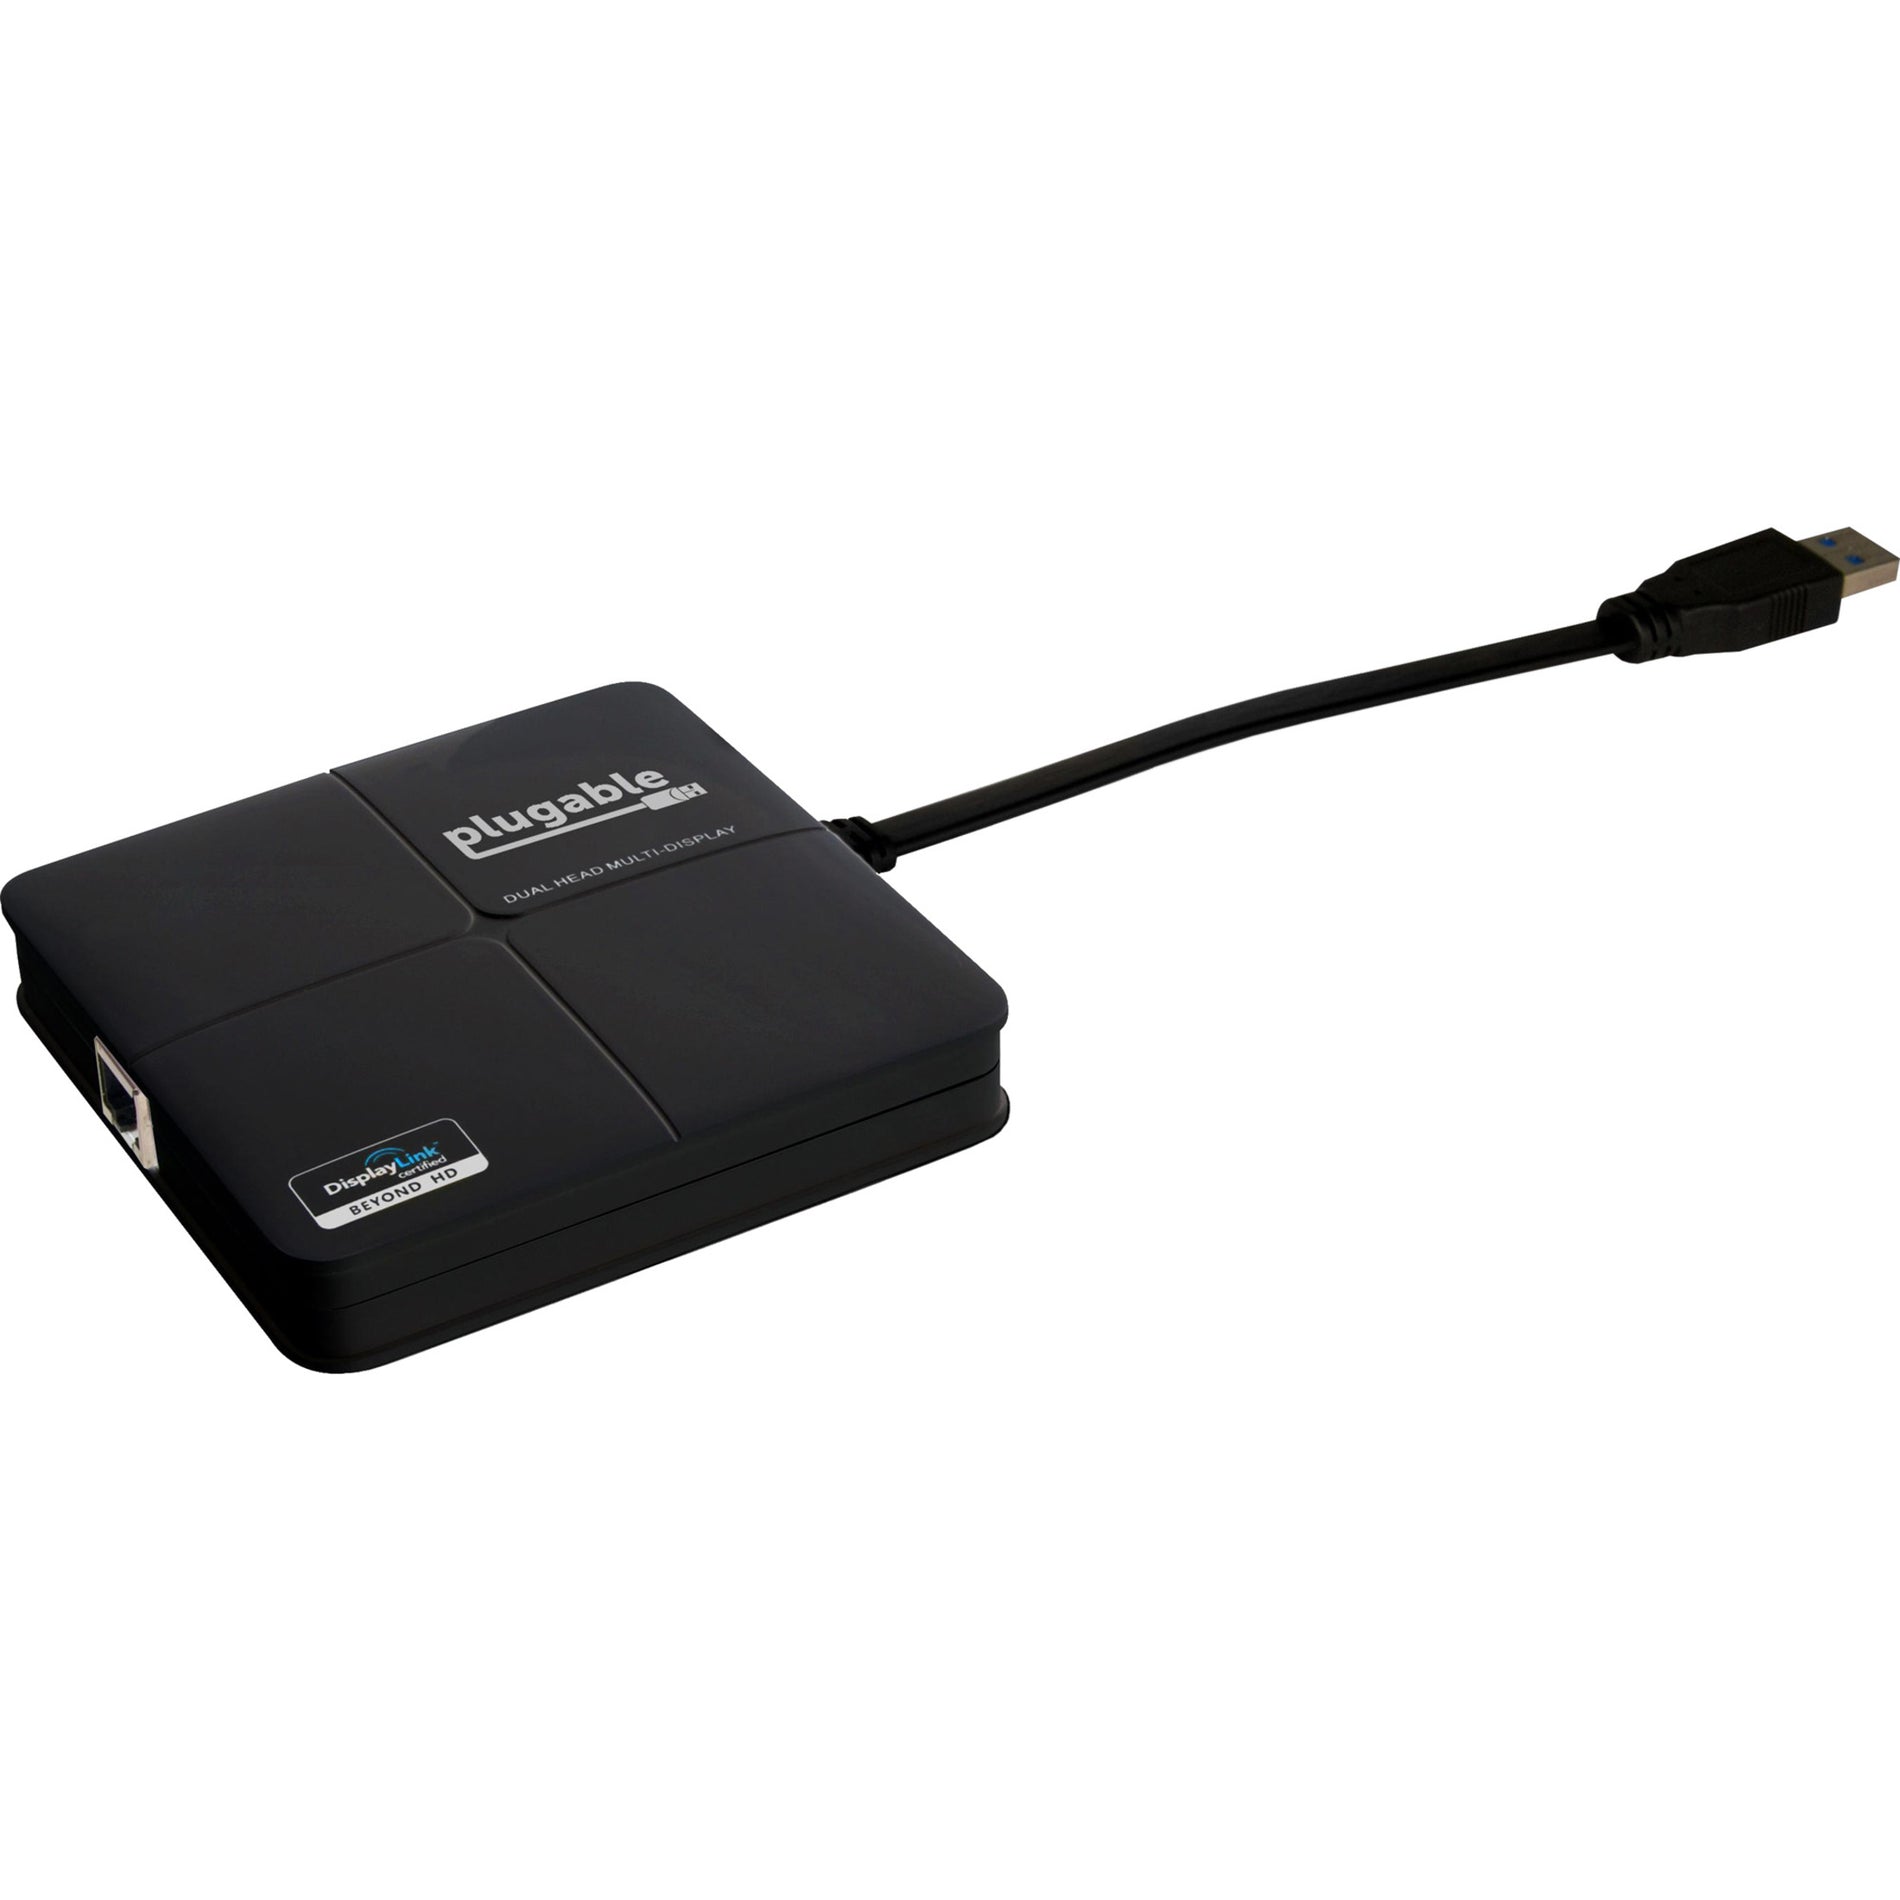 Plugable USB3-3900DHE USB 3.0 Dual Display Adapter for Multiple Monitors with Gigabit Ethernet, Windows and Mac Compatible